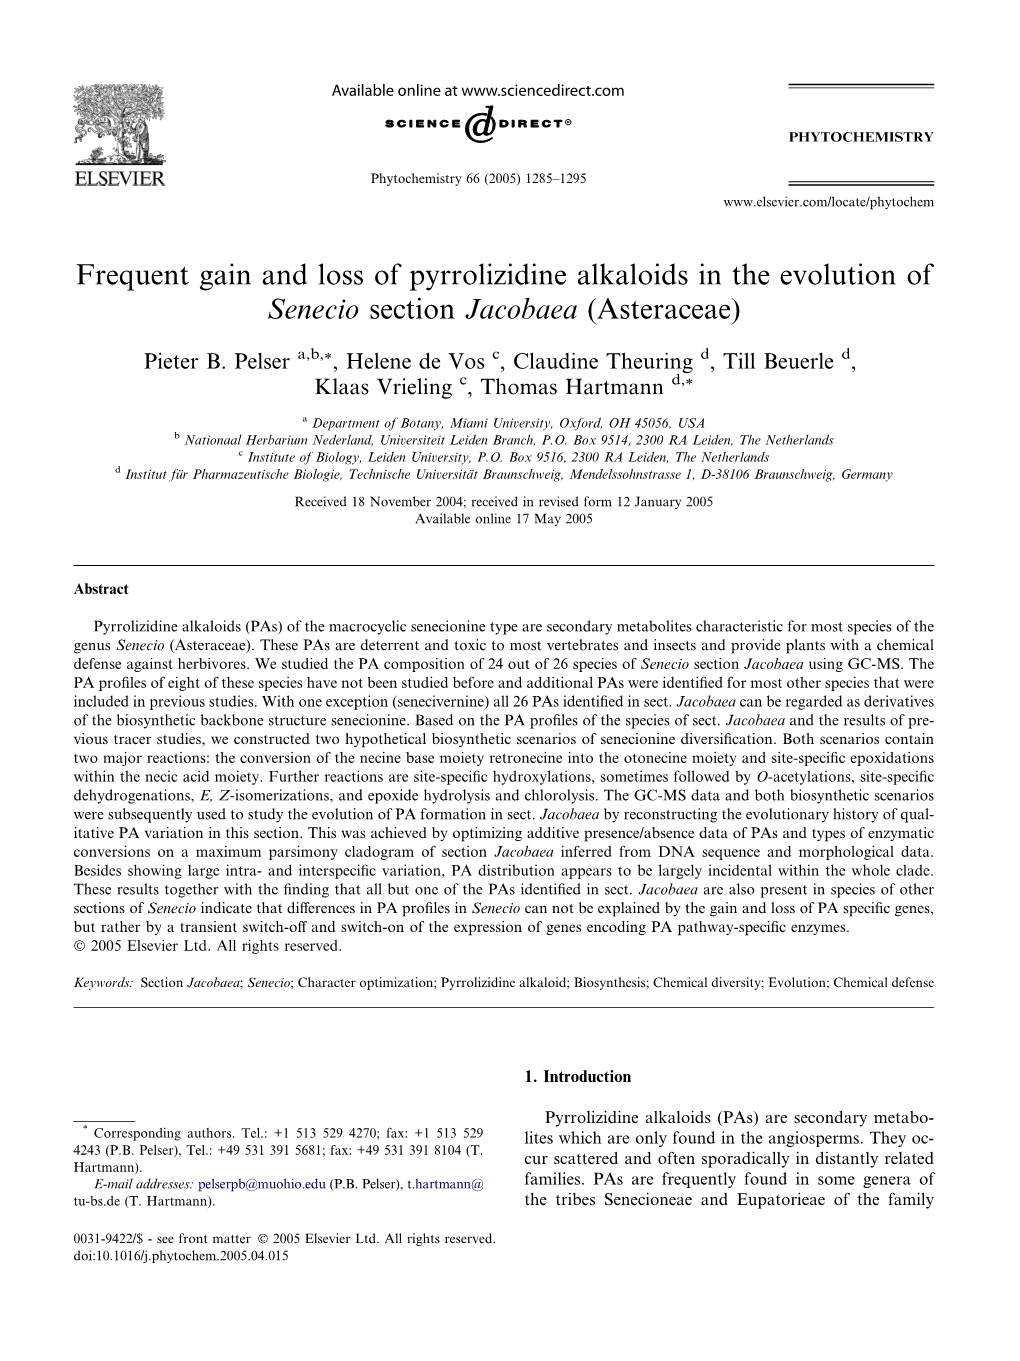 Frequent Gain and Loss of Pyrrolizidine Alkaloids in the Evolution of Senecio Section Jacobaea (Asteraceae)